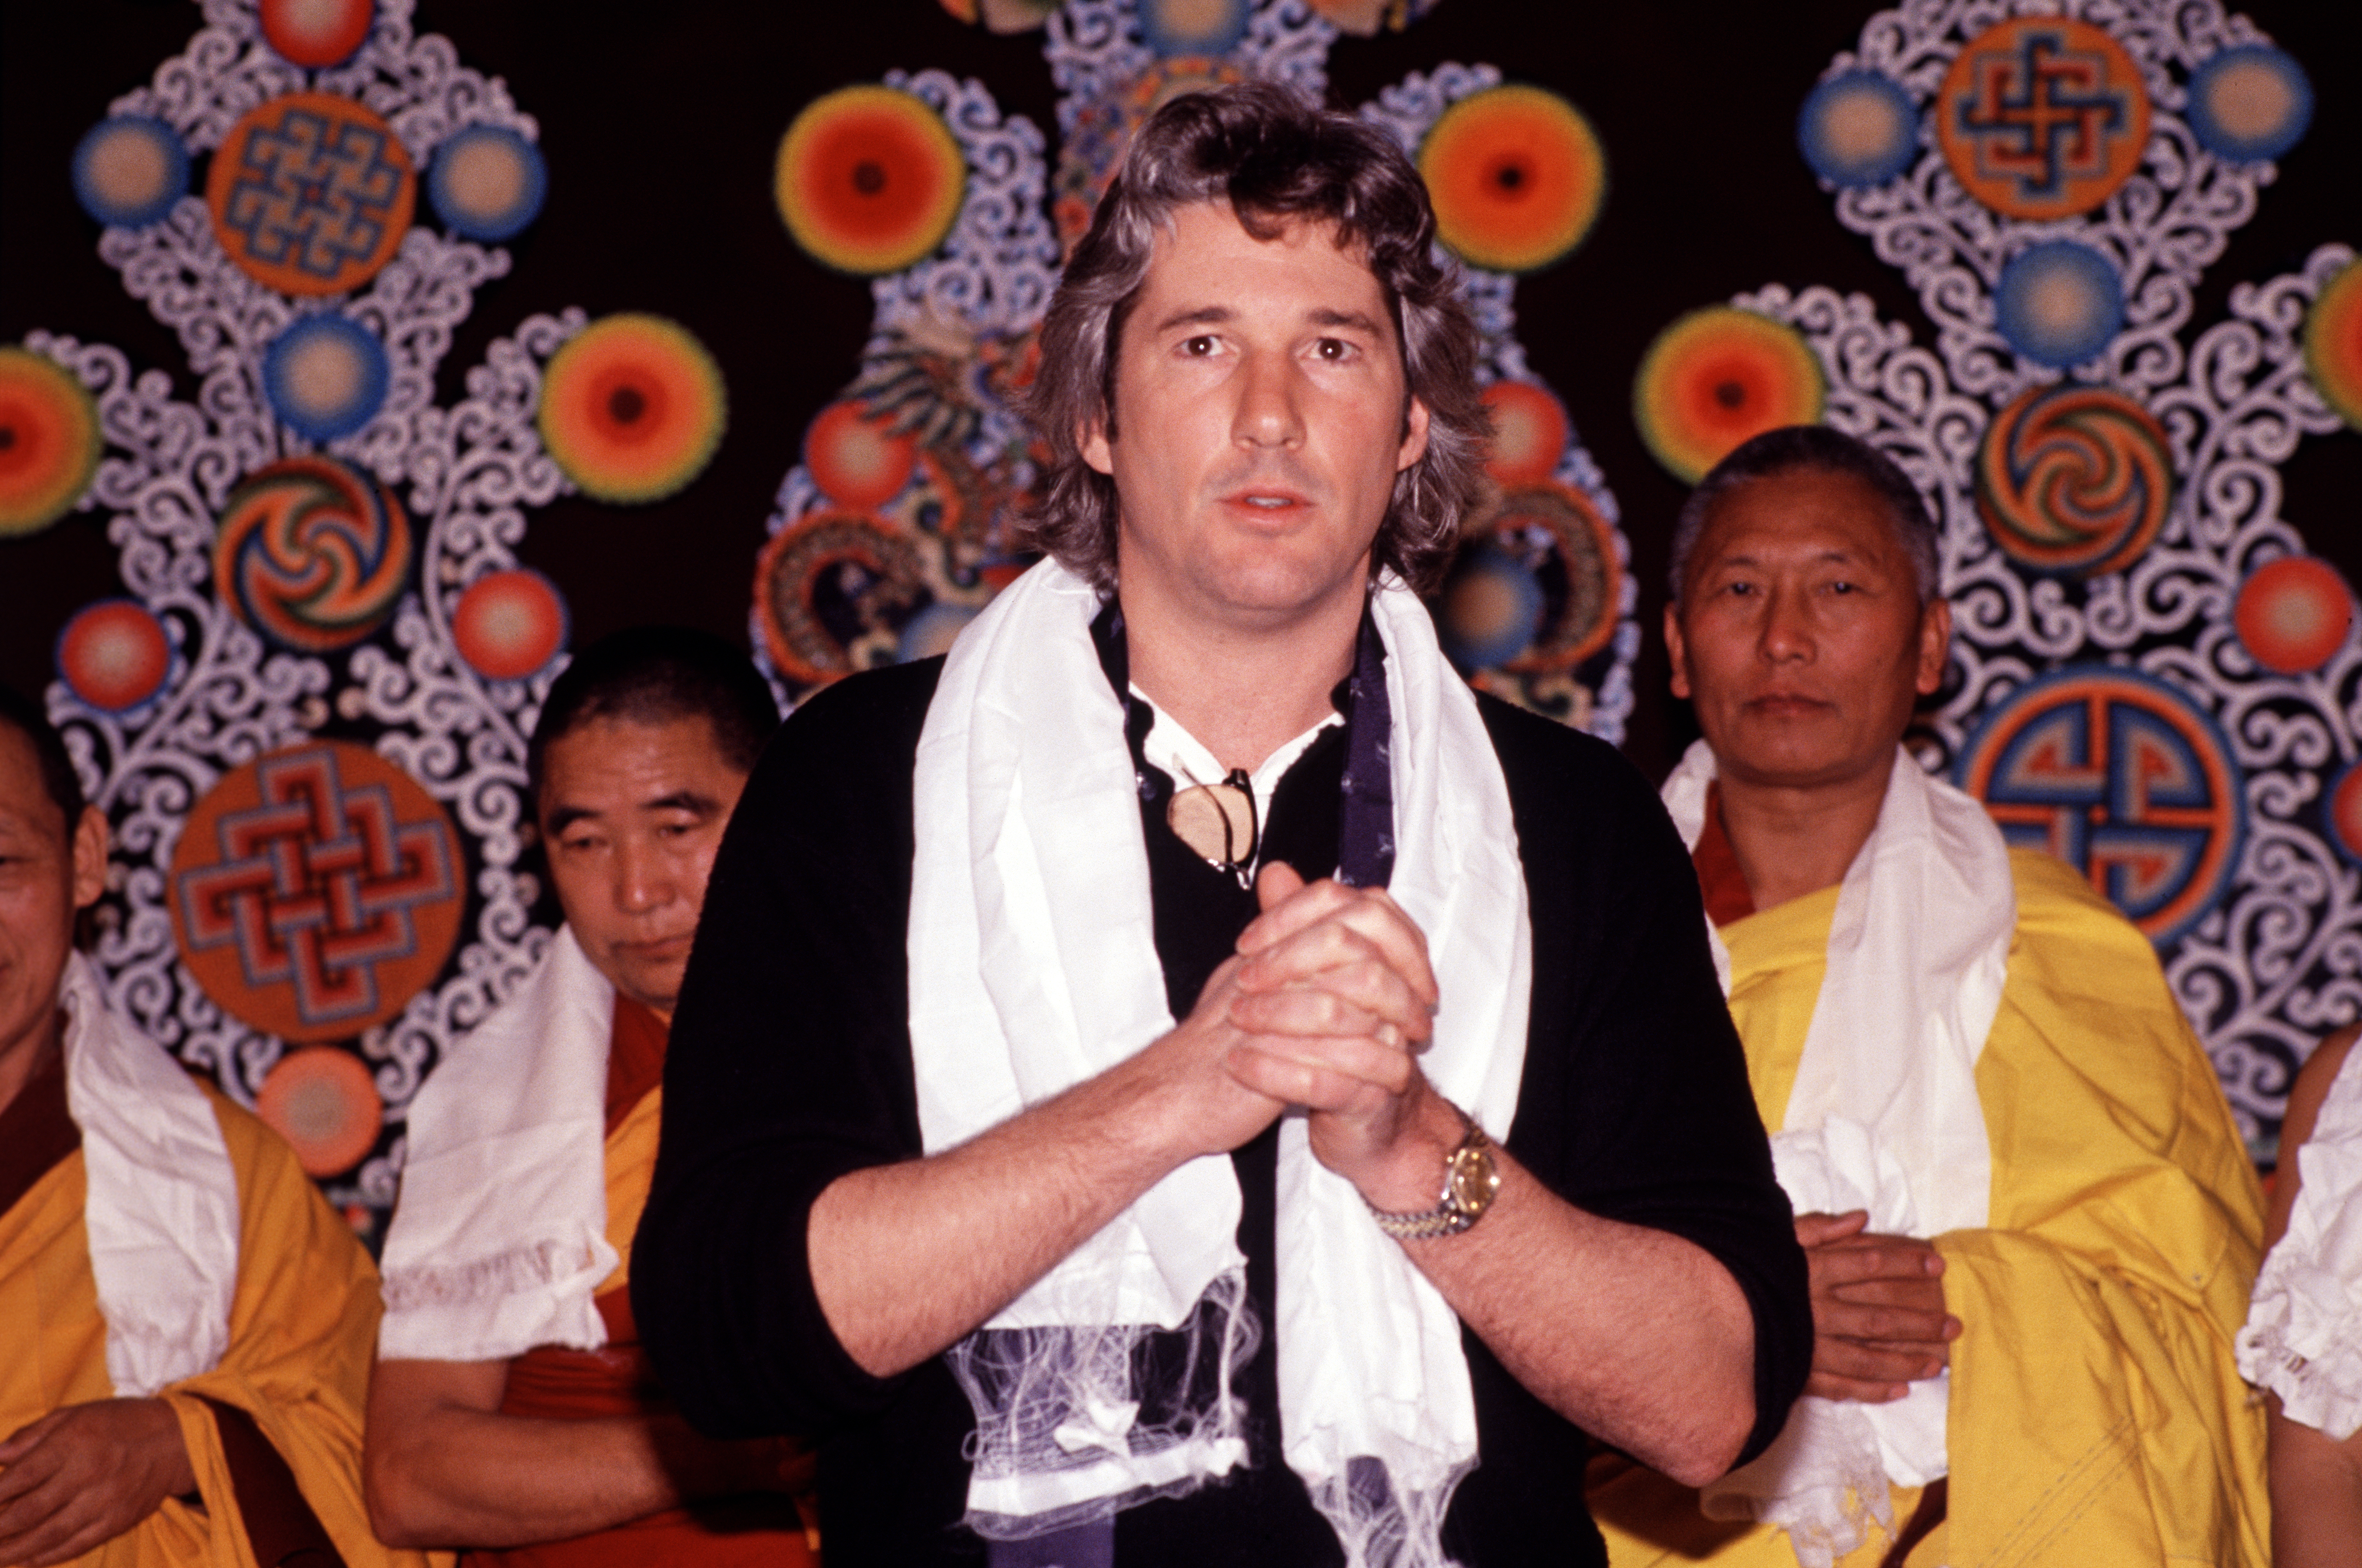 Richard Gere and Indian monks during a demonstration of butter sculptures held at the American Museum of Natural History on February 24, 1989 in New York. | Source: Getty Images